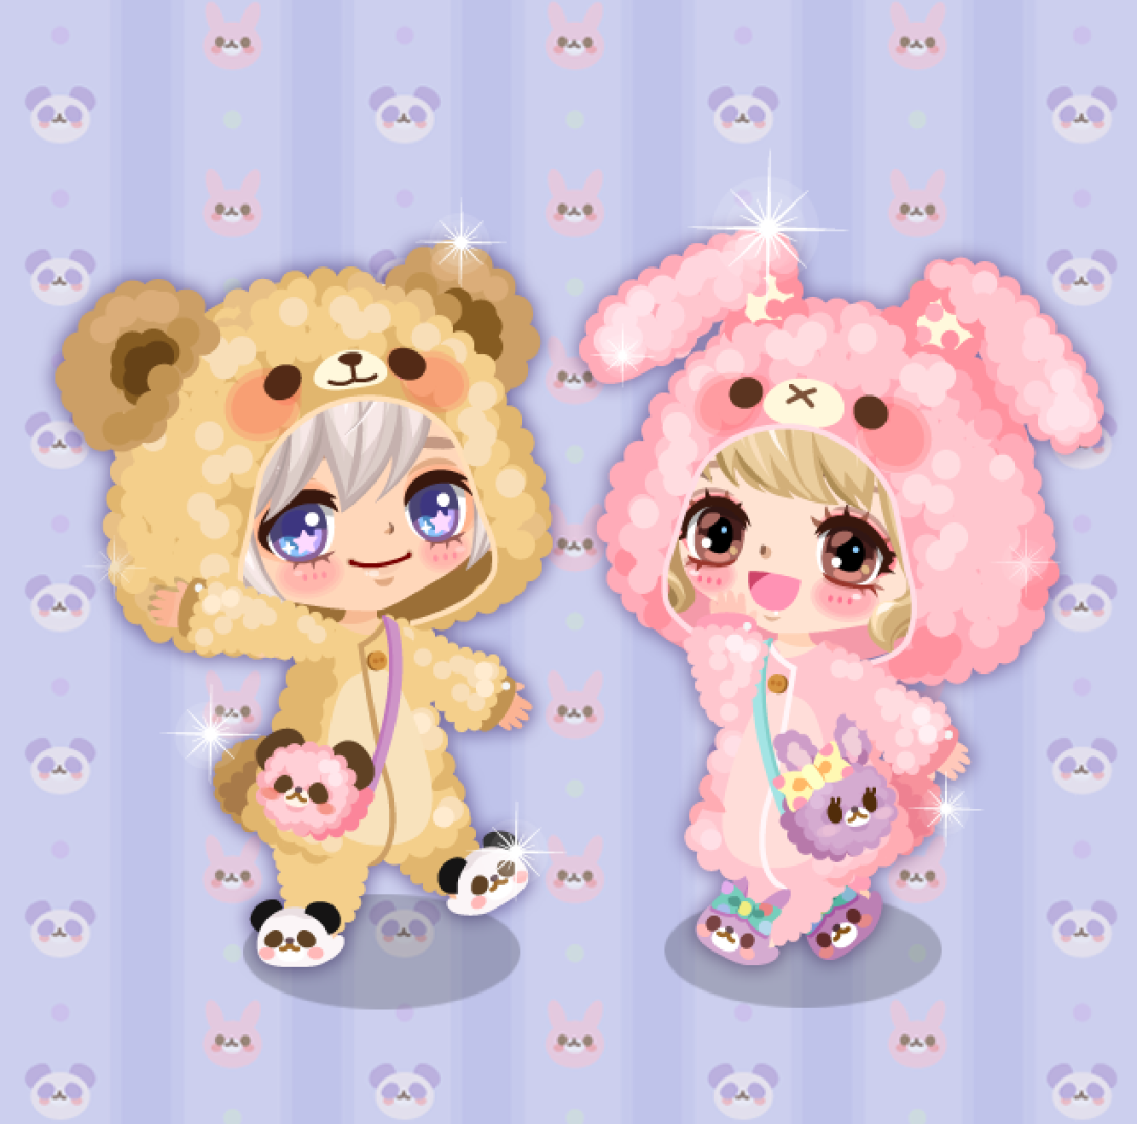 https://static.wikia.nocookie.net/lineplay/images/e/e9/Animalpajama.png/revision/latest?cb=20170903073350